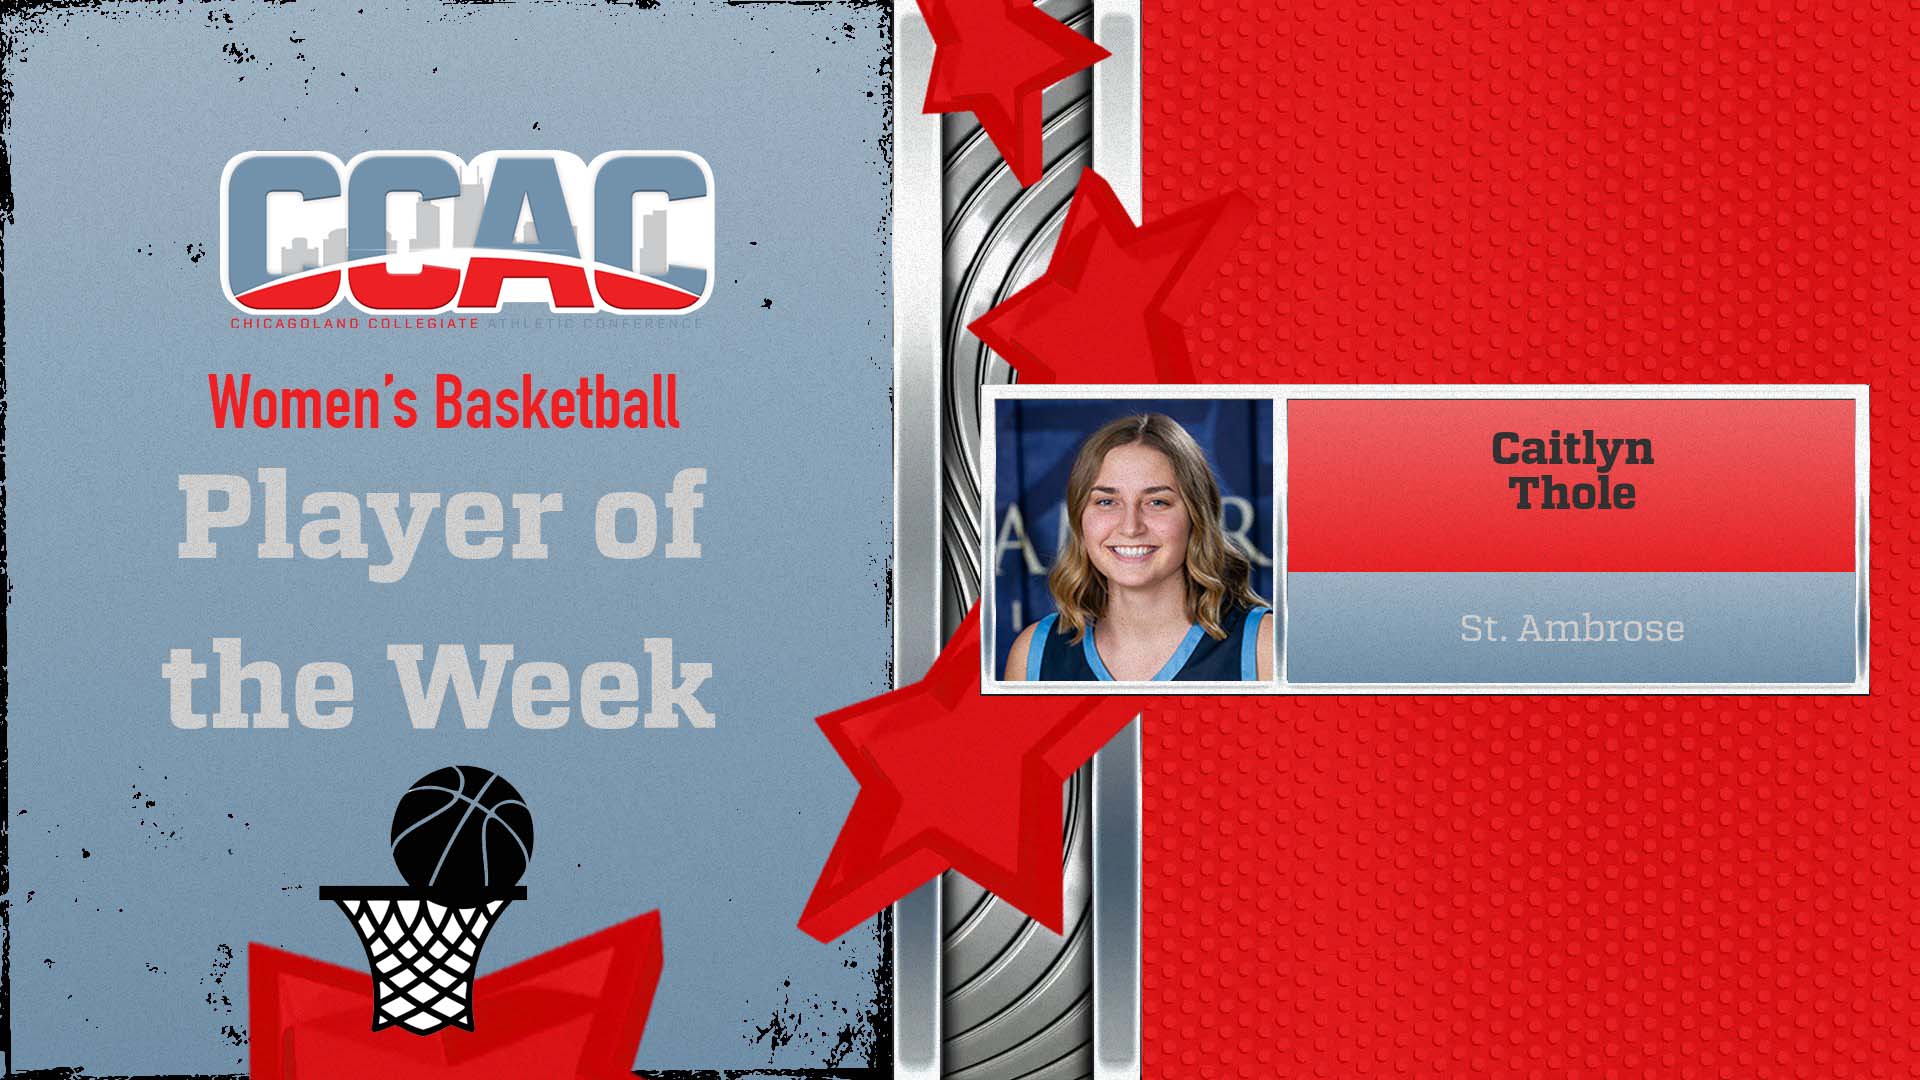 Thole named CCAC Player of the Week